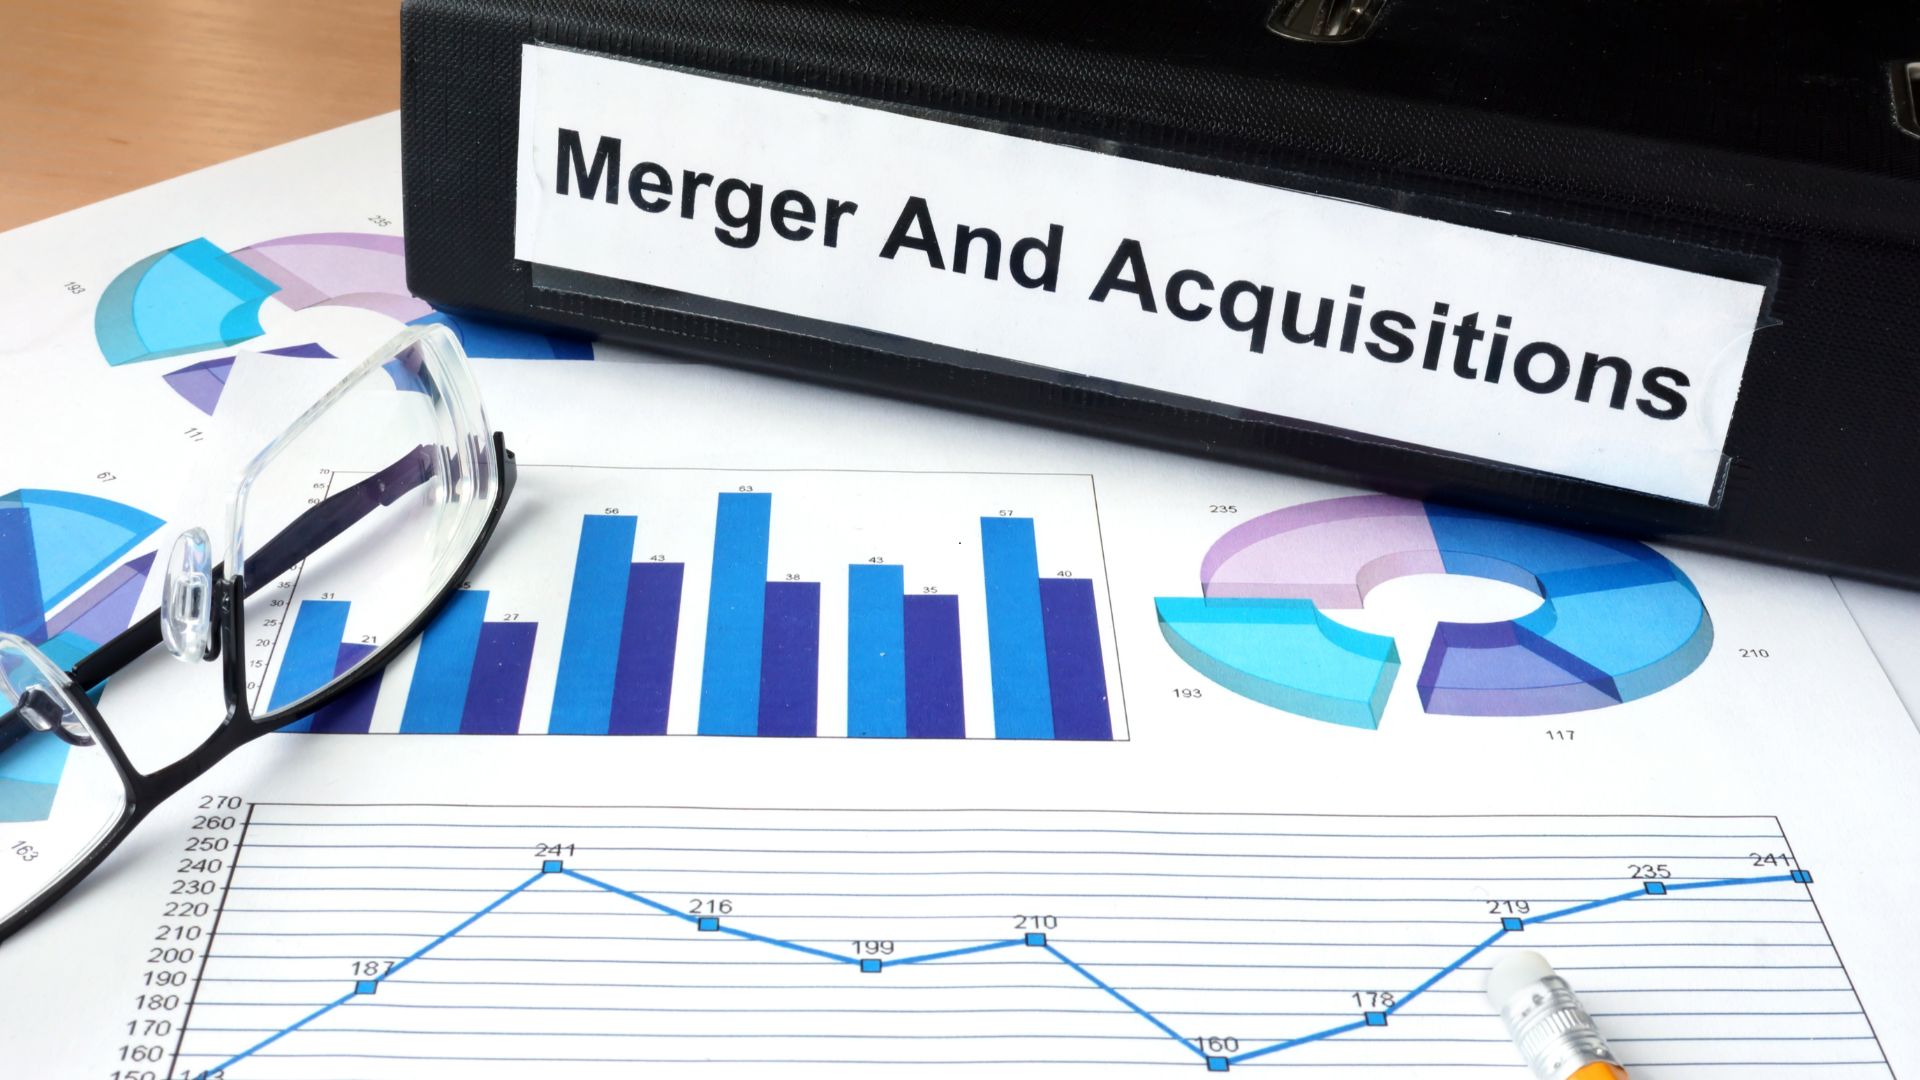 Fractional CFOs: Bridging the Gap in Merger and Acquisitions Expertise for SMEs